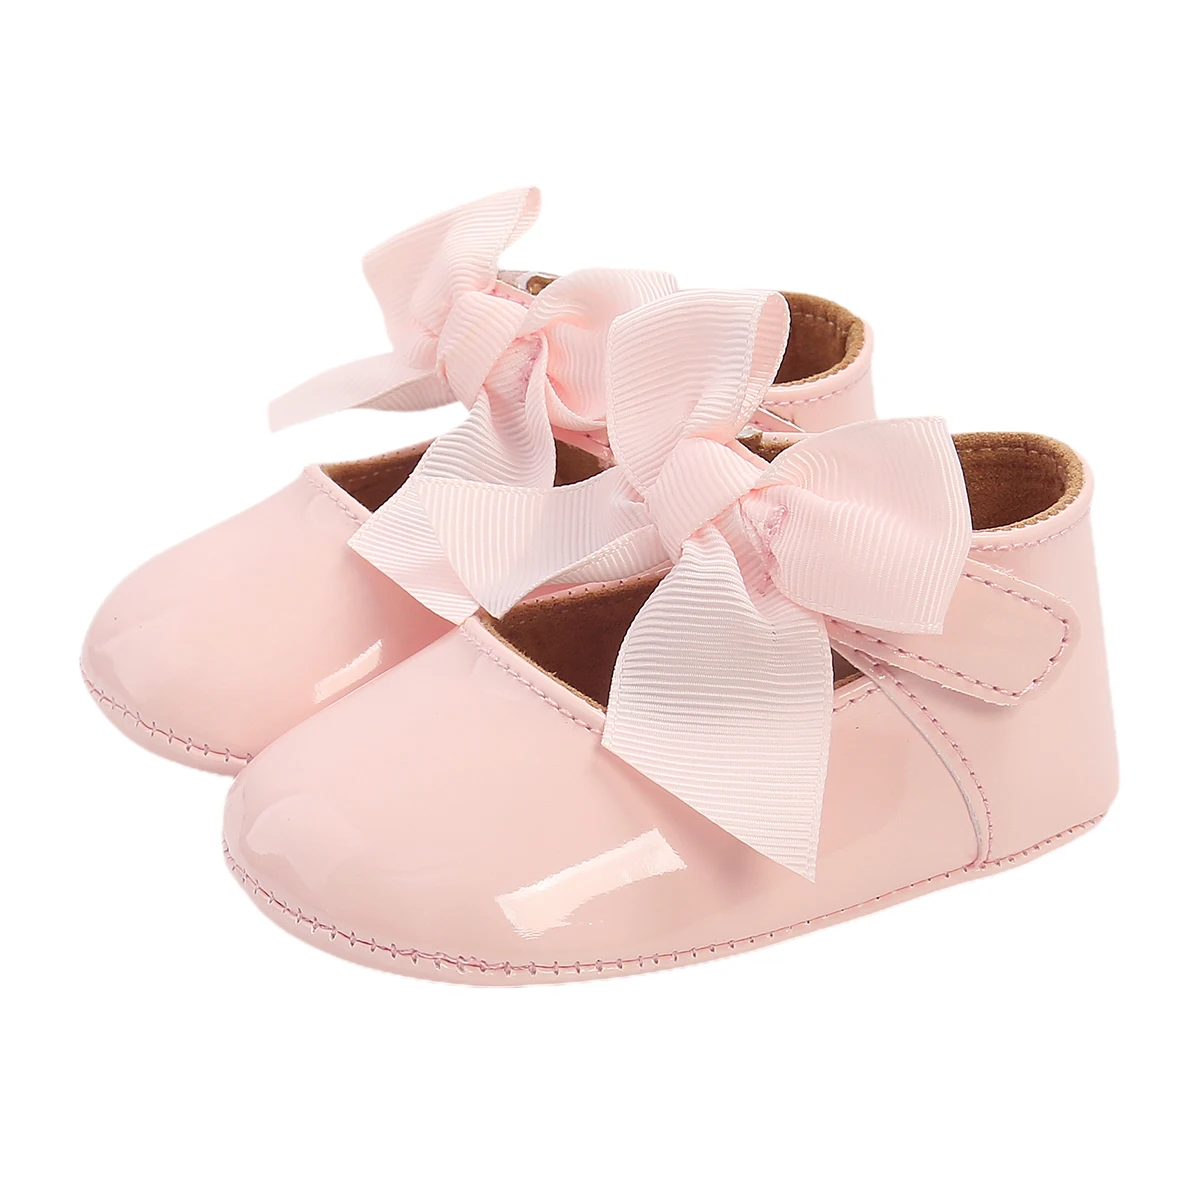 Baby Girls Solid First Walker Shoes Infant Newborn Soft Sole Bow Knot Princess Dress Mary Jane Flats Prewalker Shoes 0-18M 0 18m baby infant girls flat shoes bow knot solid first walker soft sole shoes newborn infant toddler girls princess shoes